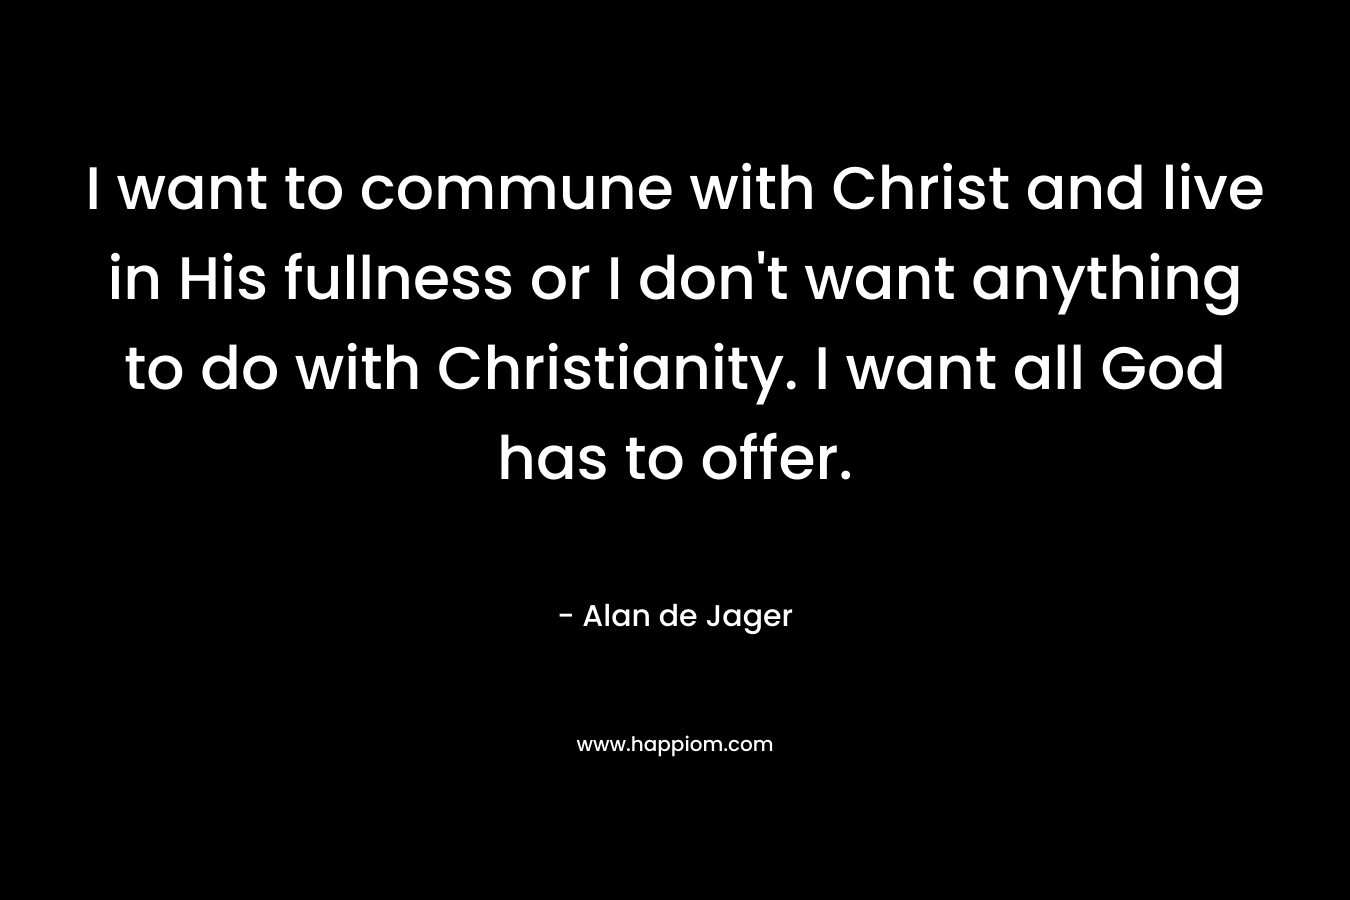 I want to commune with Christ and live in His fullness or I don’t want anything to do with Christianity. I want all God has to offer. – Alan de Jager